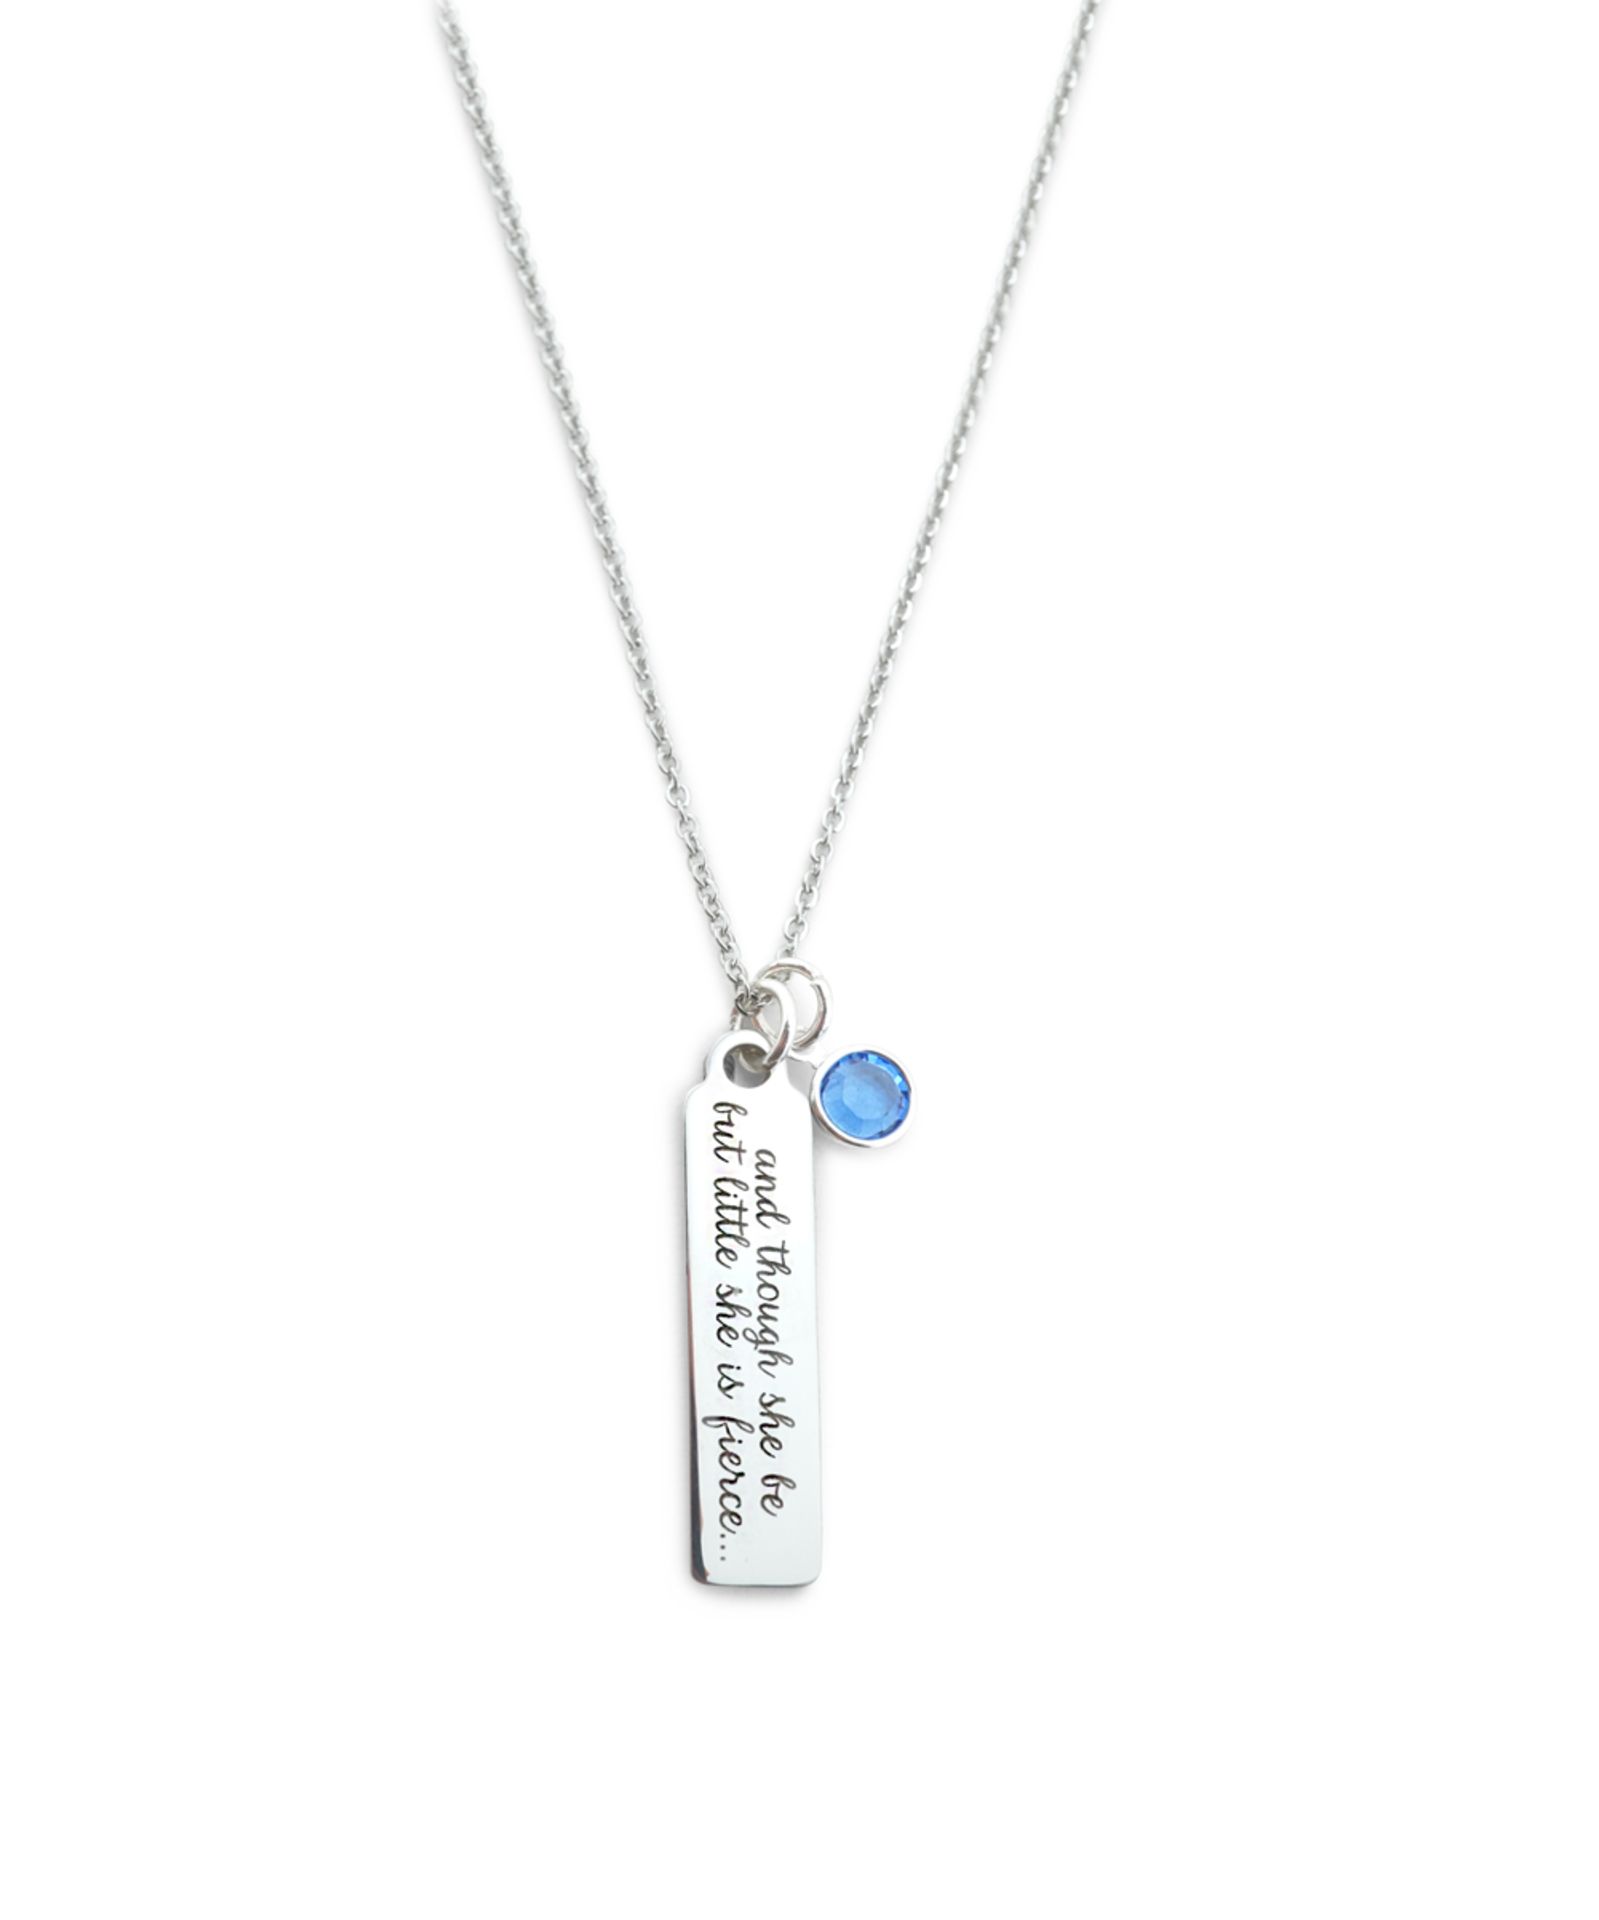 Designs By Karamarie Stainless Steel 'Though She Be' Necklace With Swarovski® Crystals (Size: One